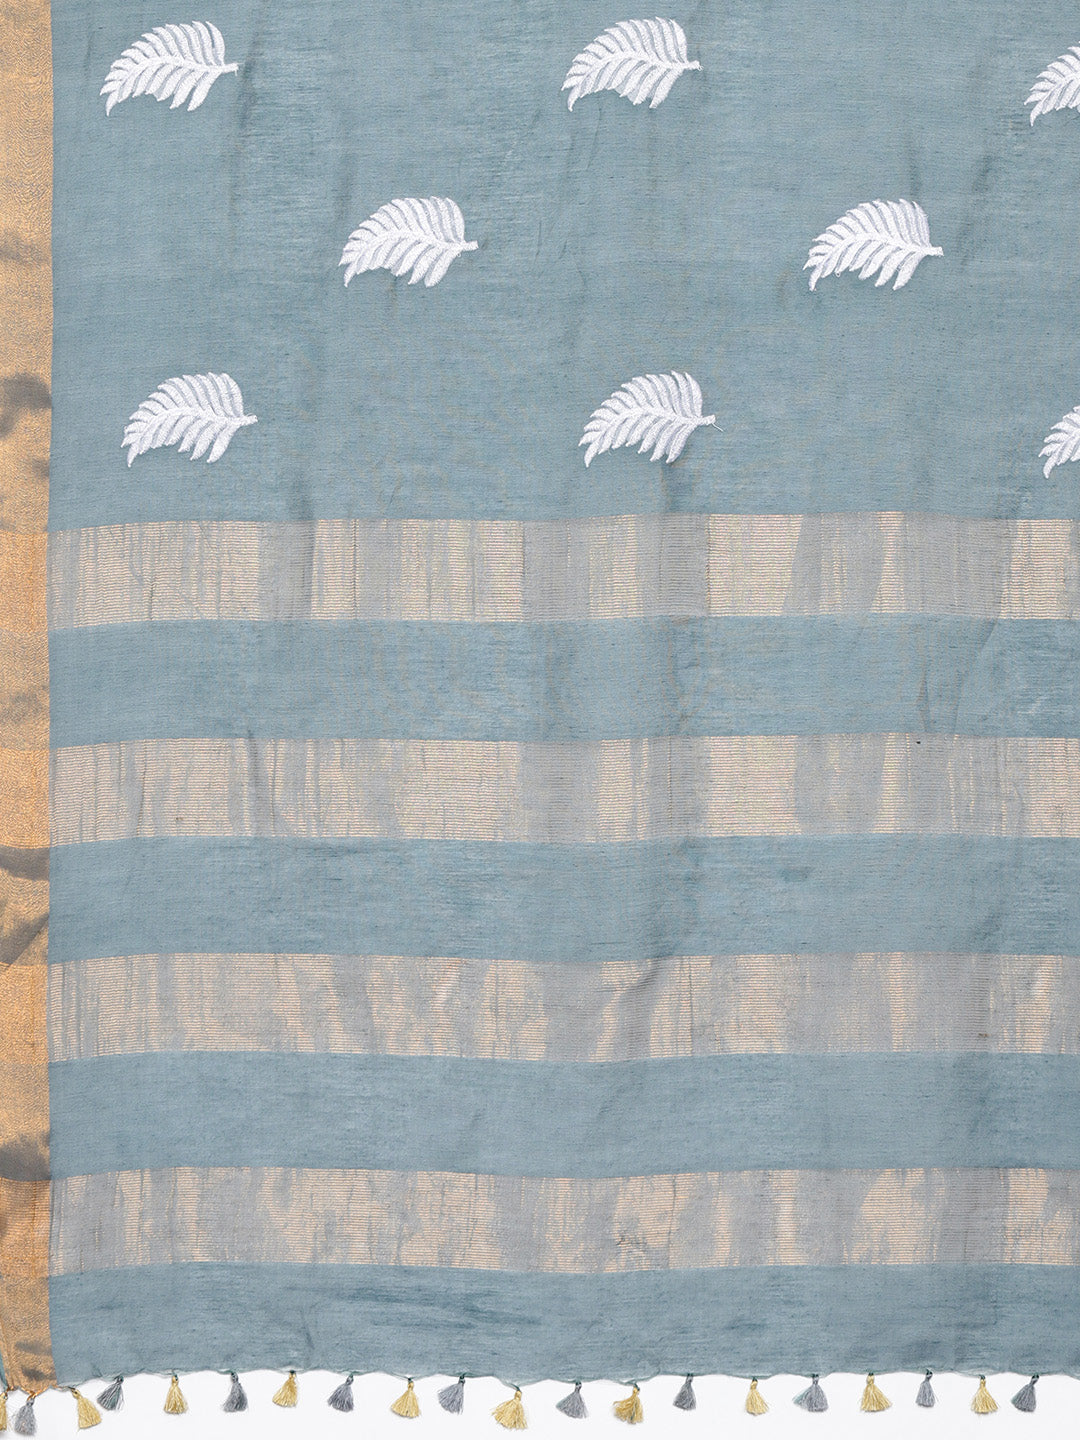 Kalakari India Kota Silk Embroidered Saree With Blouse ALBGSA0173-Saree-Kalakari India-ALBGSA0173-Geographical Indication, Hand Crafted, Heritage Prints, Linen, Natural Dyes, Pure Cotton, Sarees, Sustainable Fabrics, Woven-[Linen,Ethnic,wear,Fashionista,Handloom,Handicraft,Indigo,blockprint,block,print,Cotton,Chanderi,Blue, latest,classy,party,bollywood,trendy,summer,style,traditional,formal,elegant,unique,style,hand,block,print, dabu,booti,gift,present,glamorous,affordable,collectible,Sari,Sare